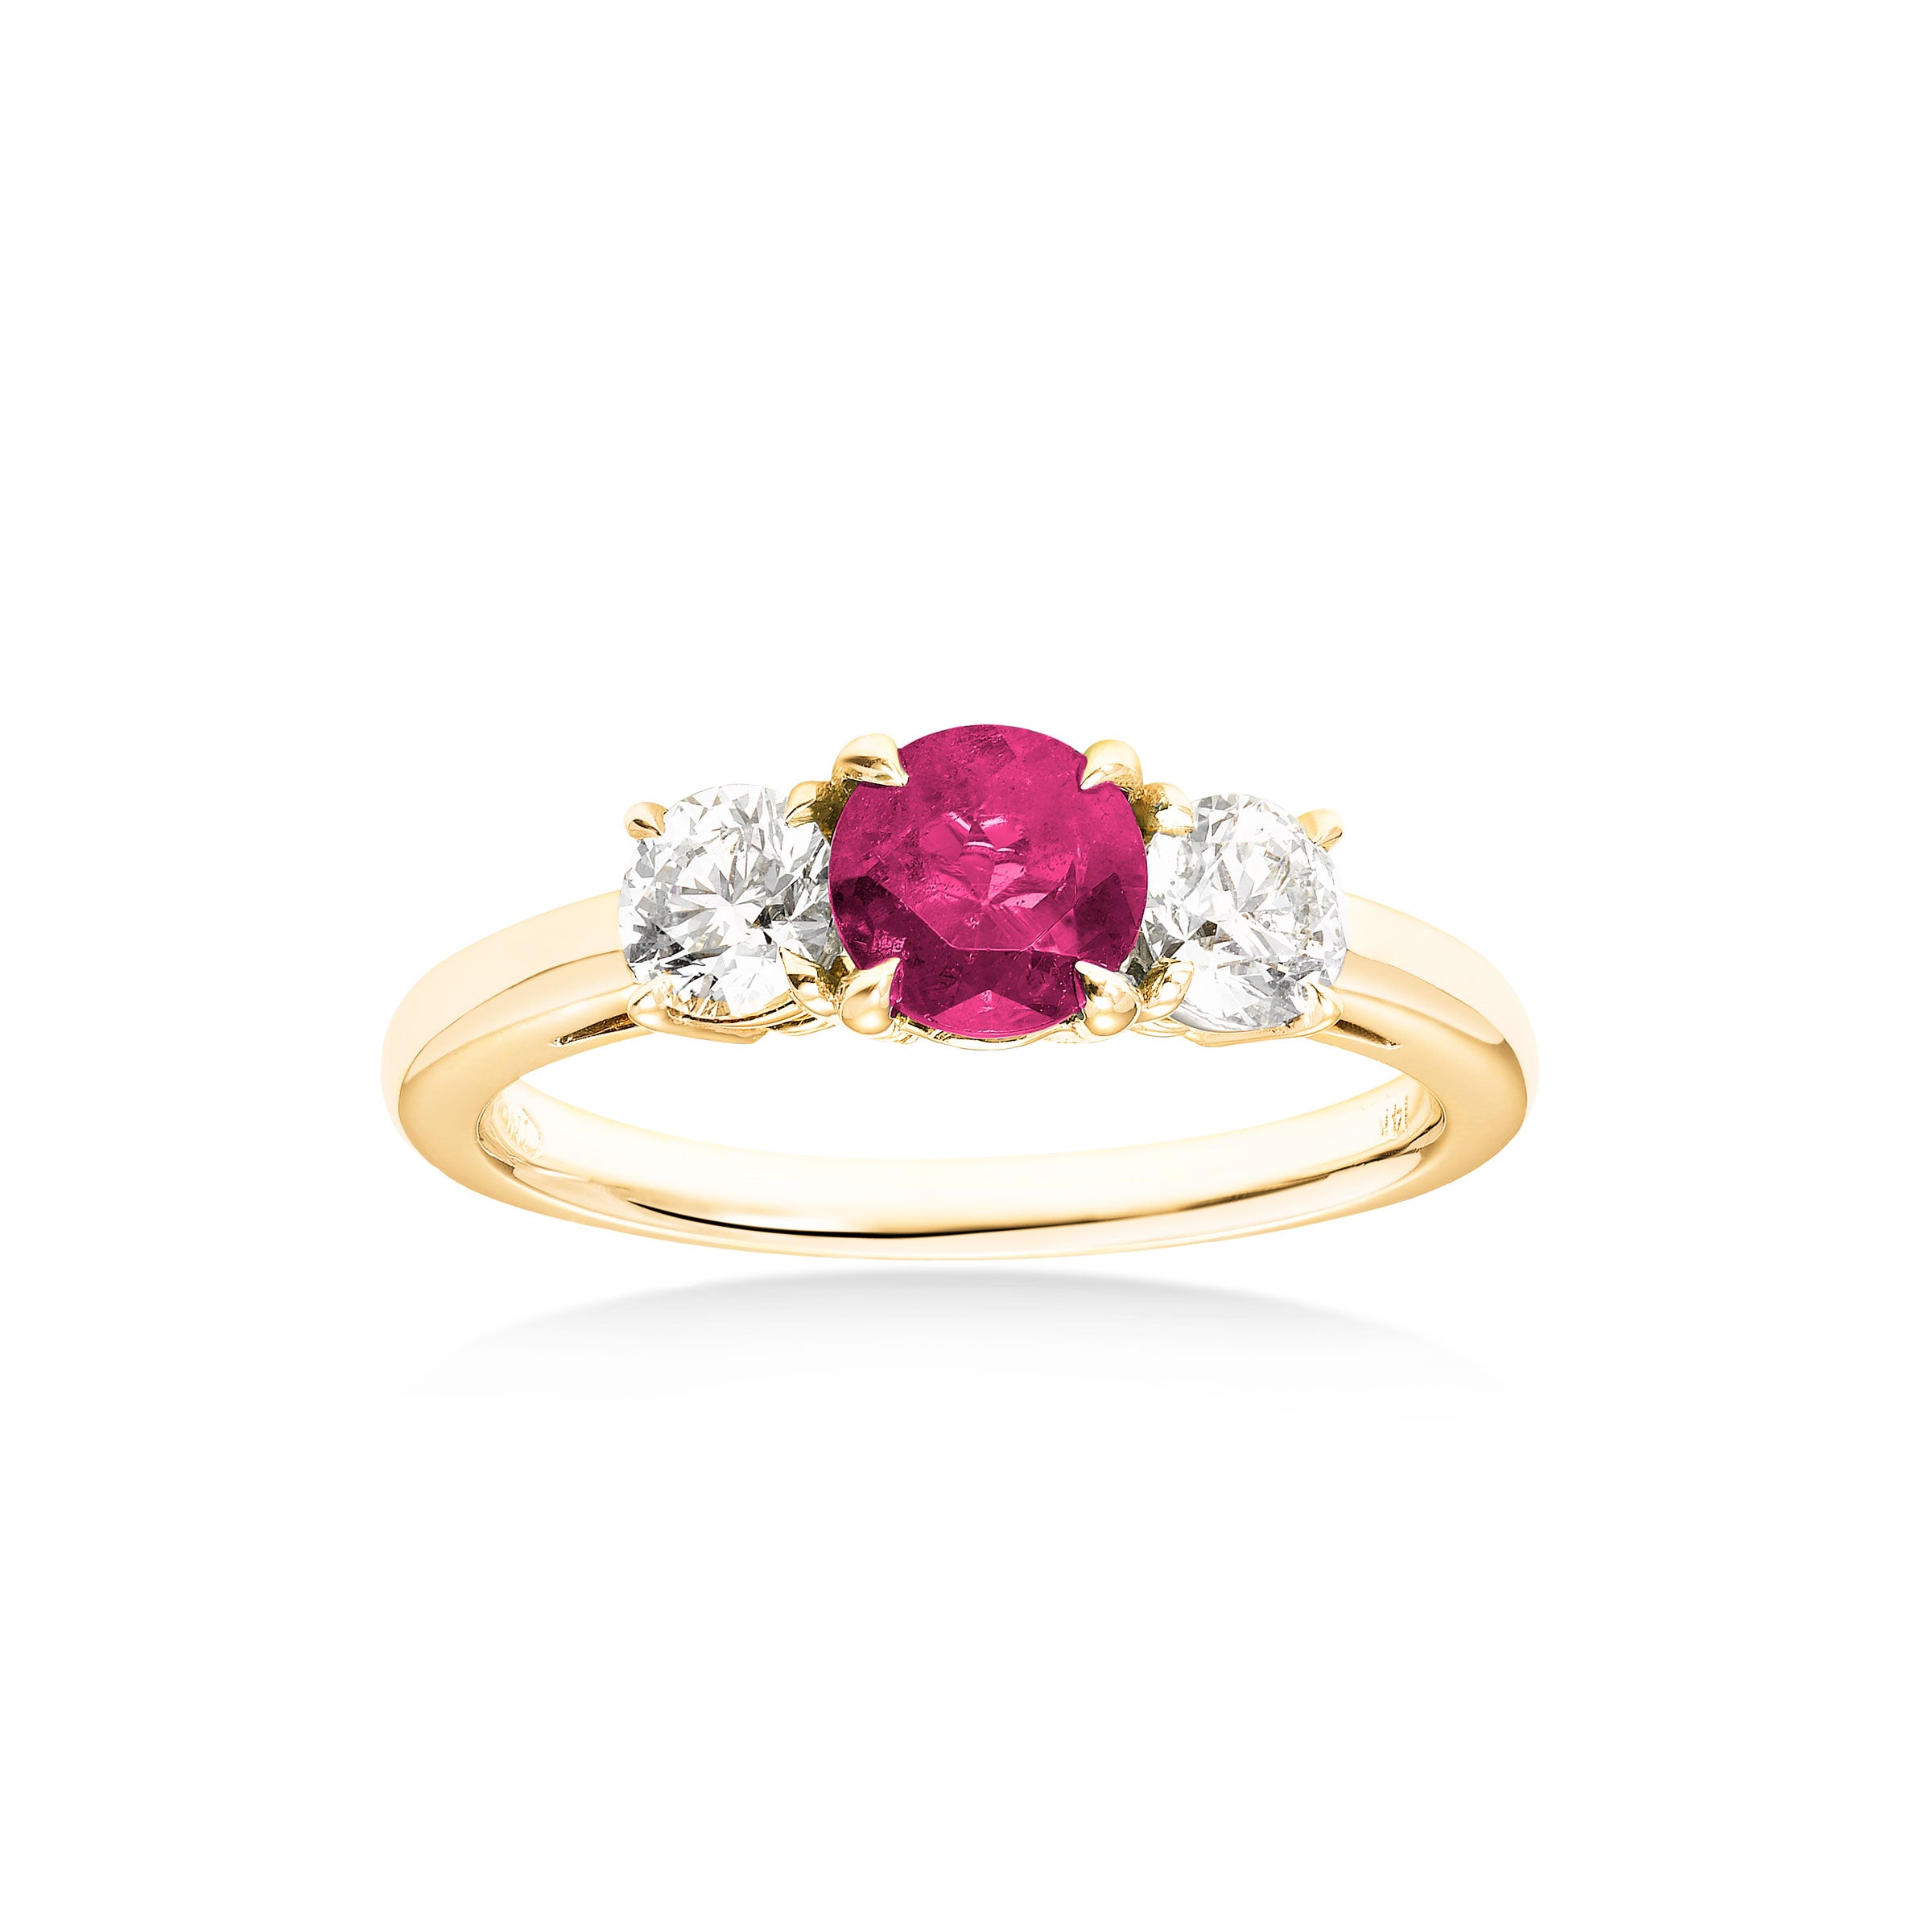 Ruby and Diamond Ring: Affordable Real Ruby Ring with Brilliants